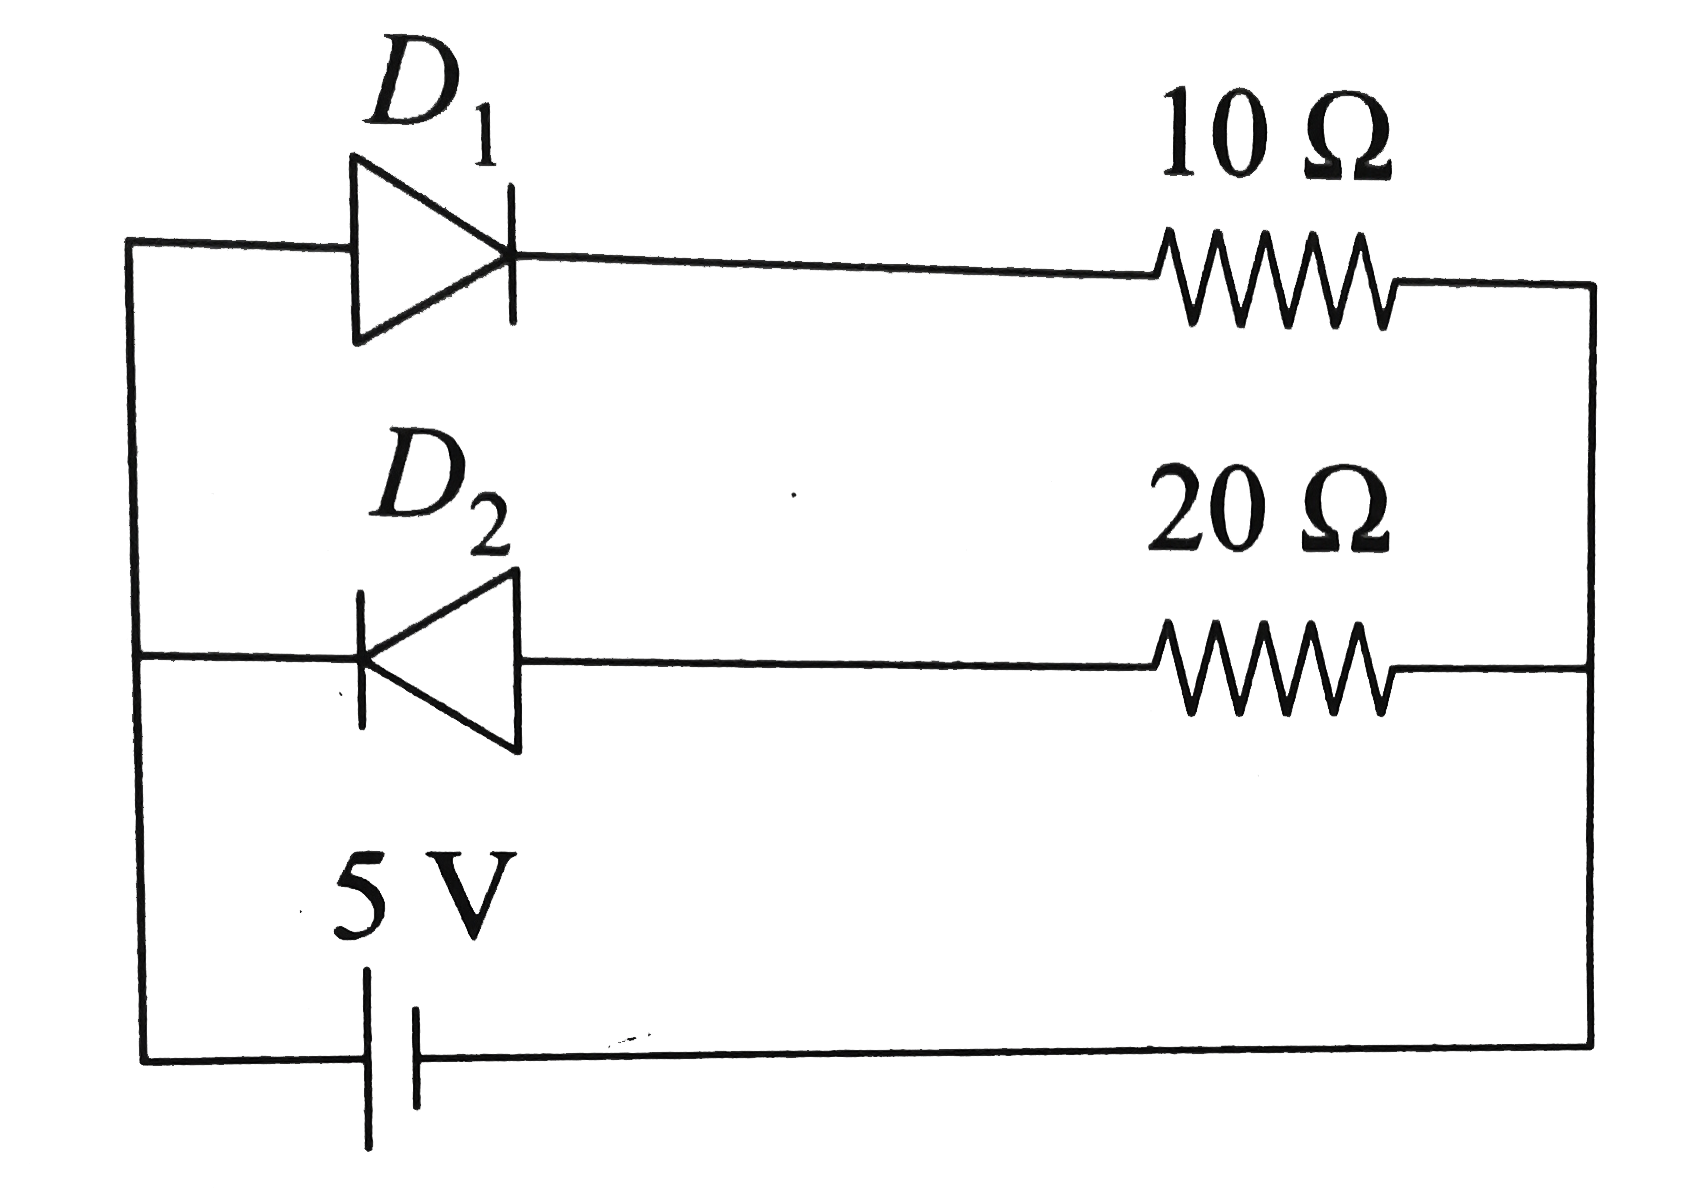 Two ideal diodes are connected to a battery as shown in the circuit. The current supplied by the battery is